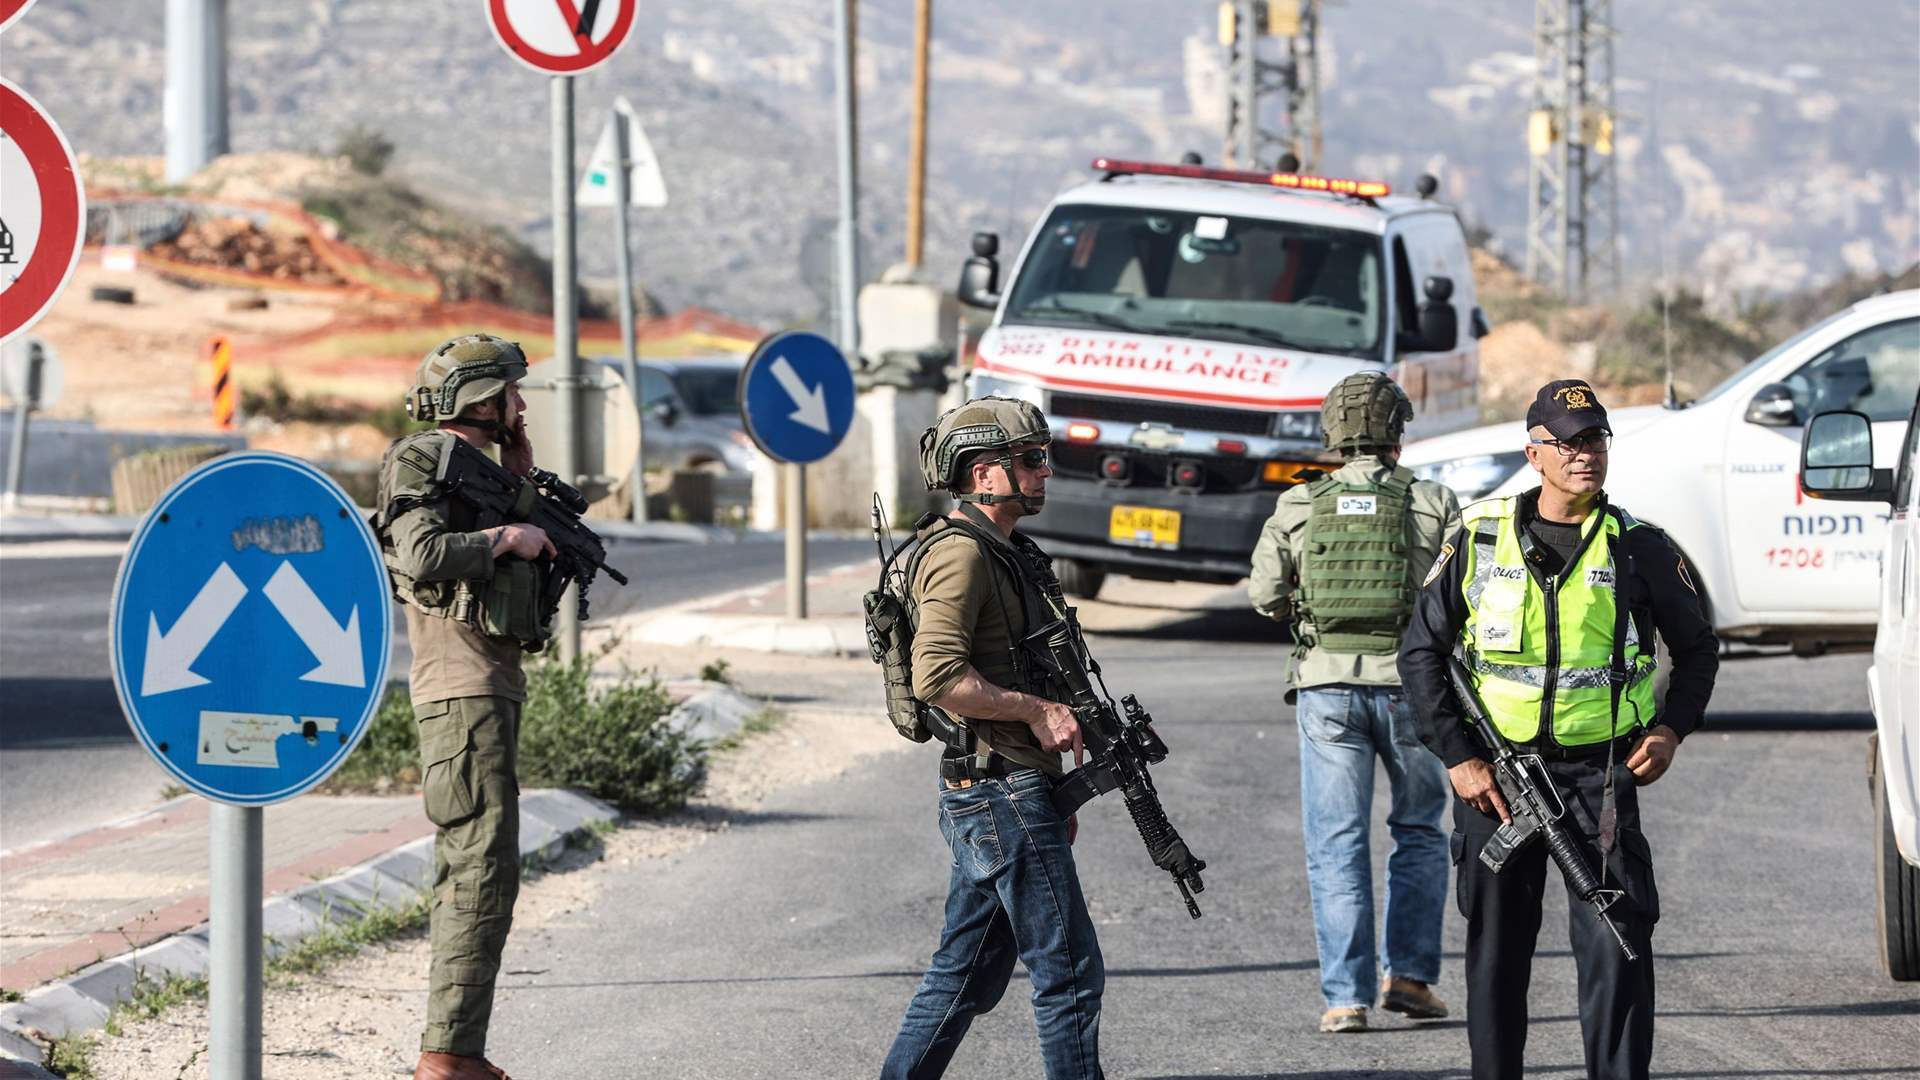 Israeli army says two hurt, assailant ‘neutralized’ in West Bank ramming attack